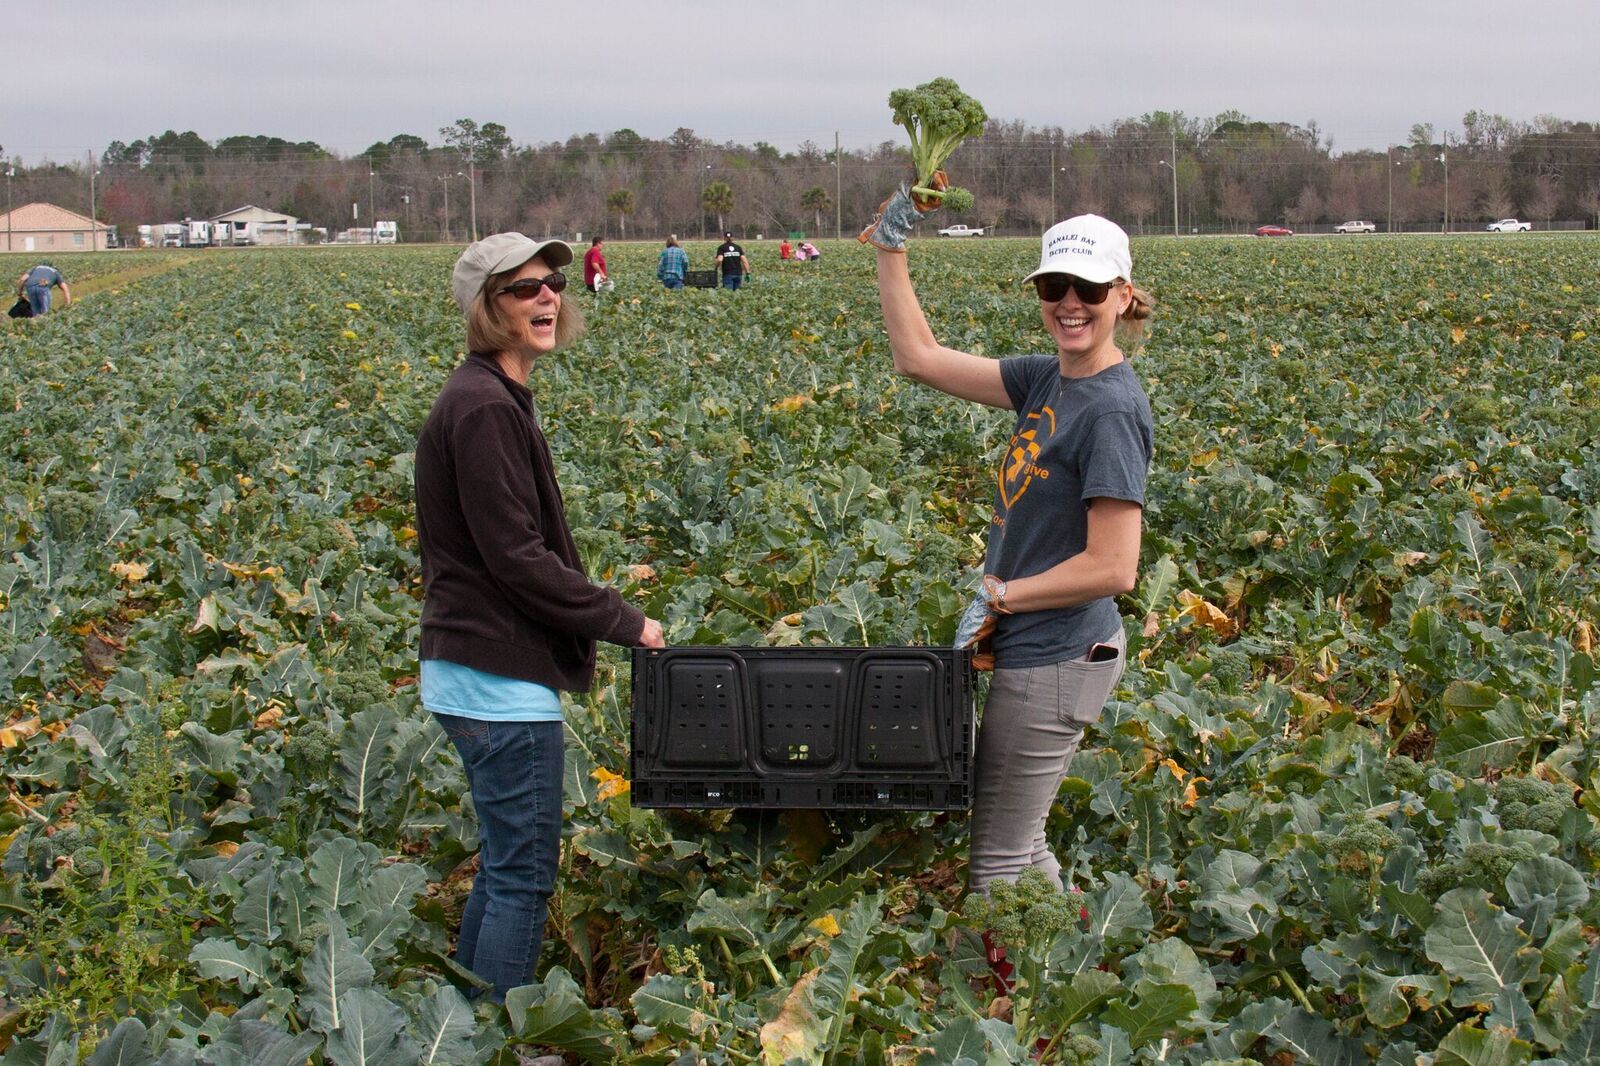 EPIC church member Jamie Furry and Bonnie Vining volunteer at the Northeast Florida gleaning event. Courtesy photo by John Manze